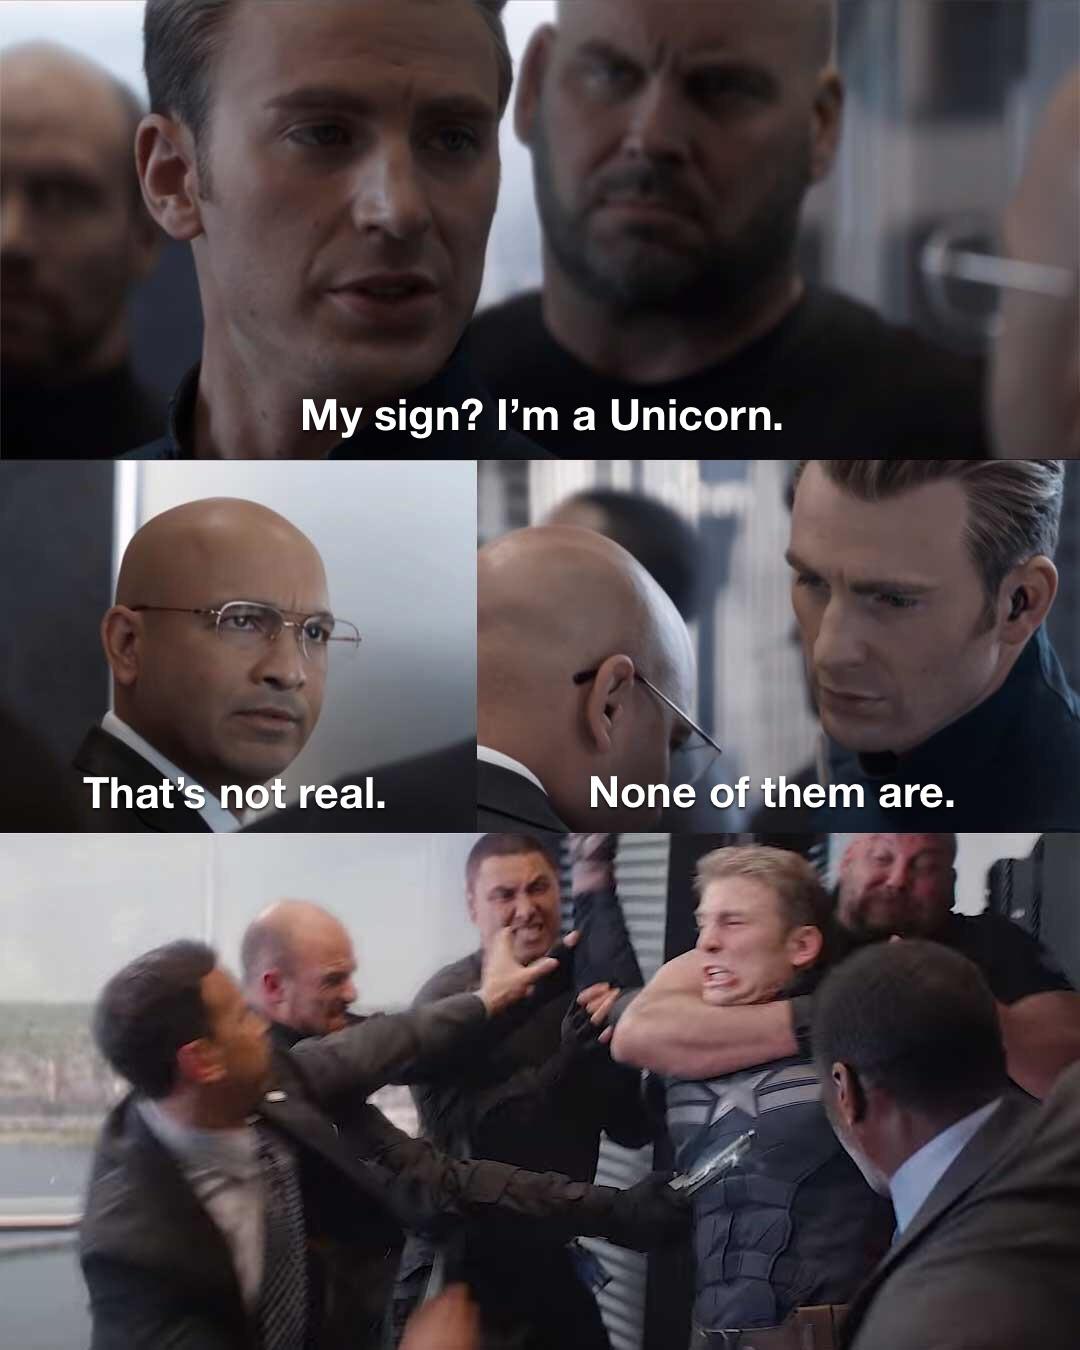 My sign? I'm a Unicorn. That's not real. None of them are.